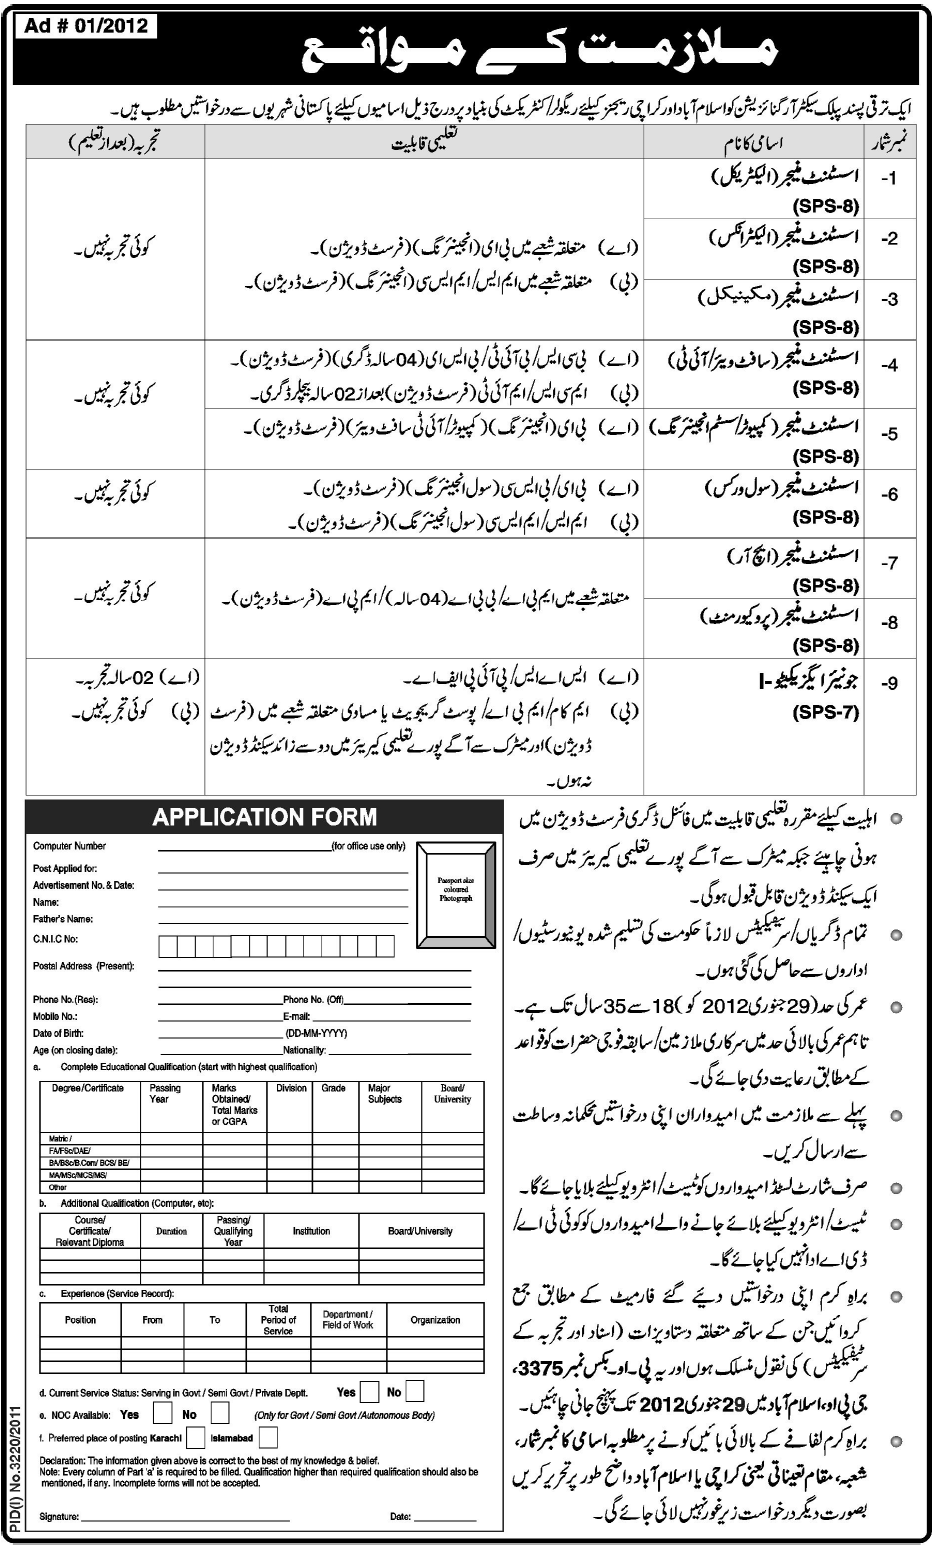 Public Sector Organization Required Staff for Islamabad and Karachi Regions